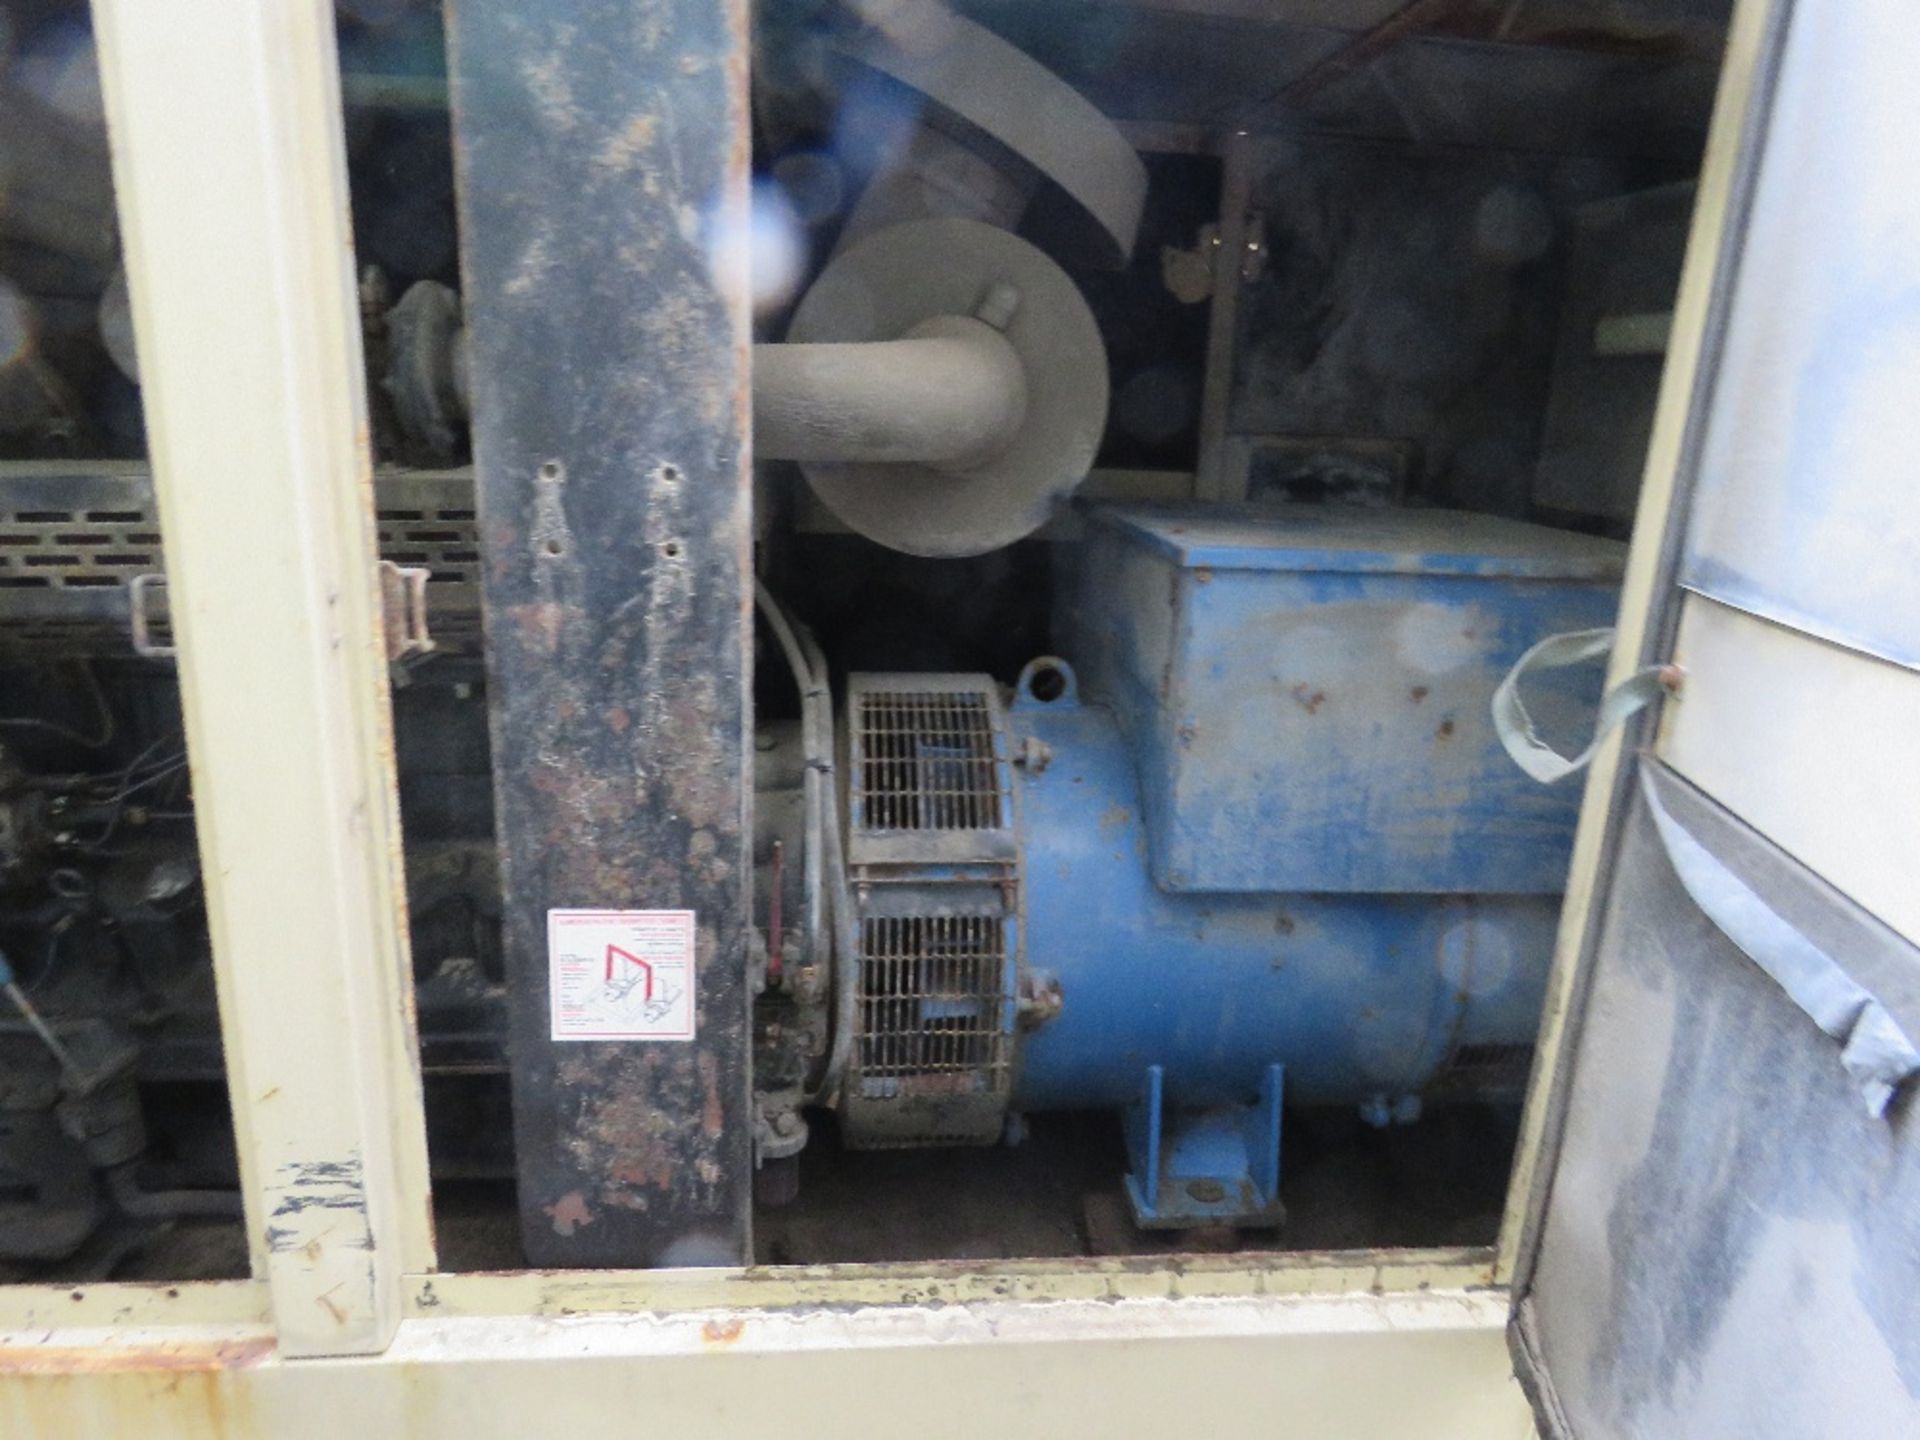 INGERSOLL RAND G200 SKID MOUNTED 200KVA RATED GENERATOR SET WITH JOHN DEERE ENGINE. WHEN TESTED WAS - Image 7 of 9